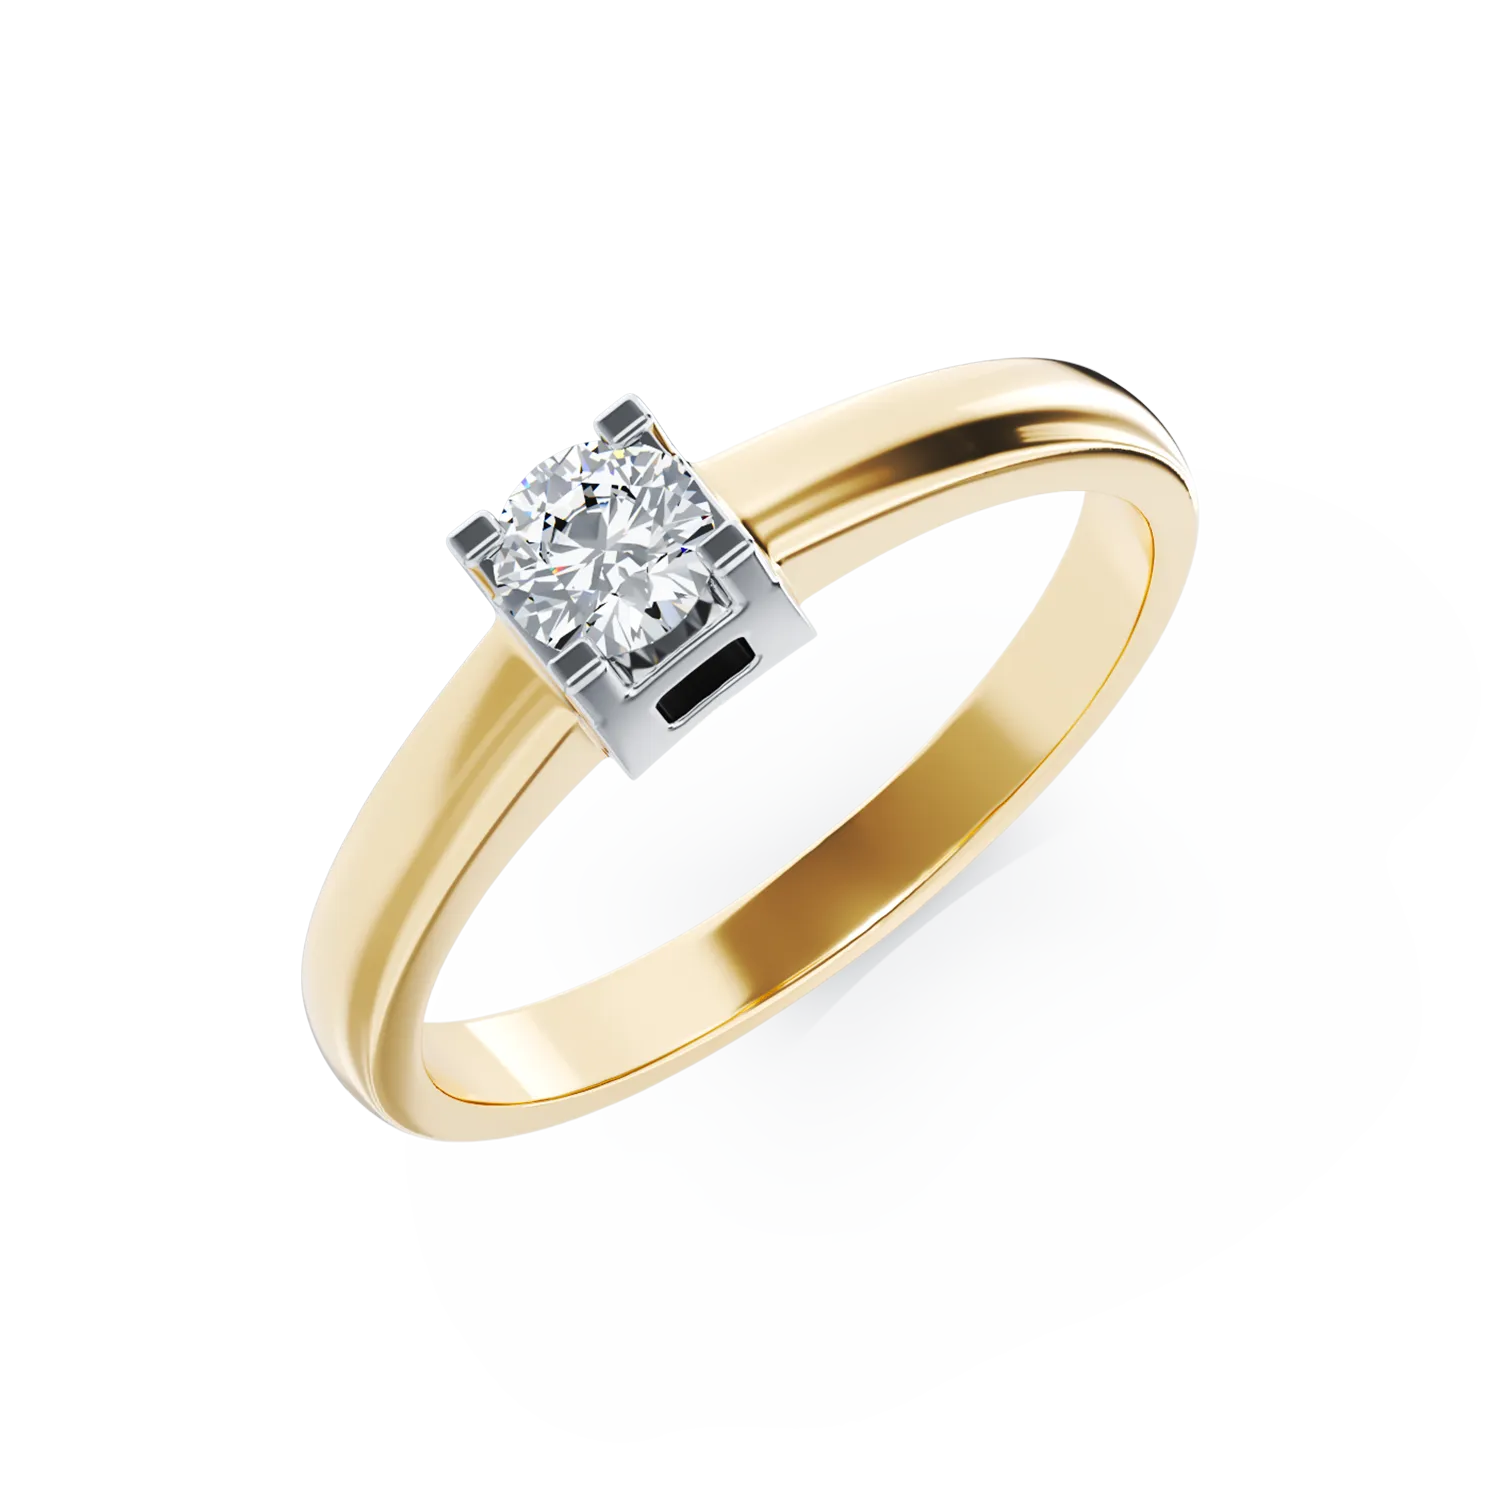 18K yellow gold engagement ring with 0.14ct solitaire diamond